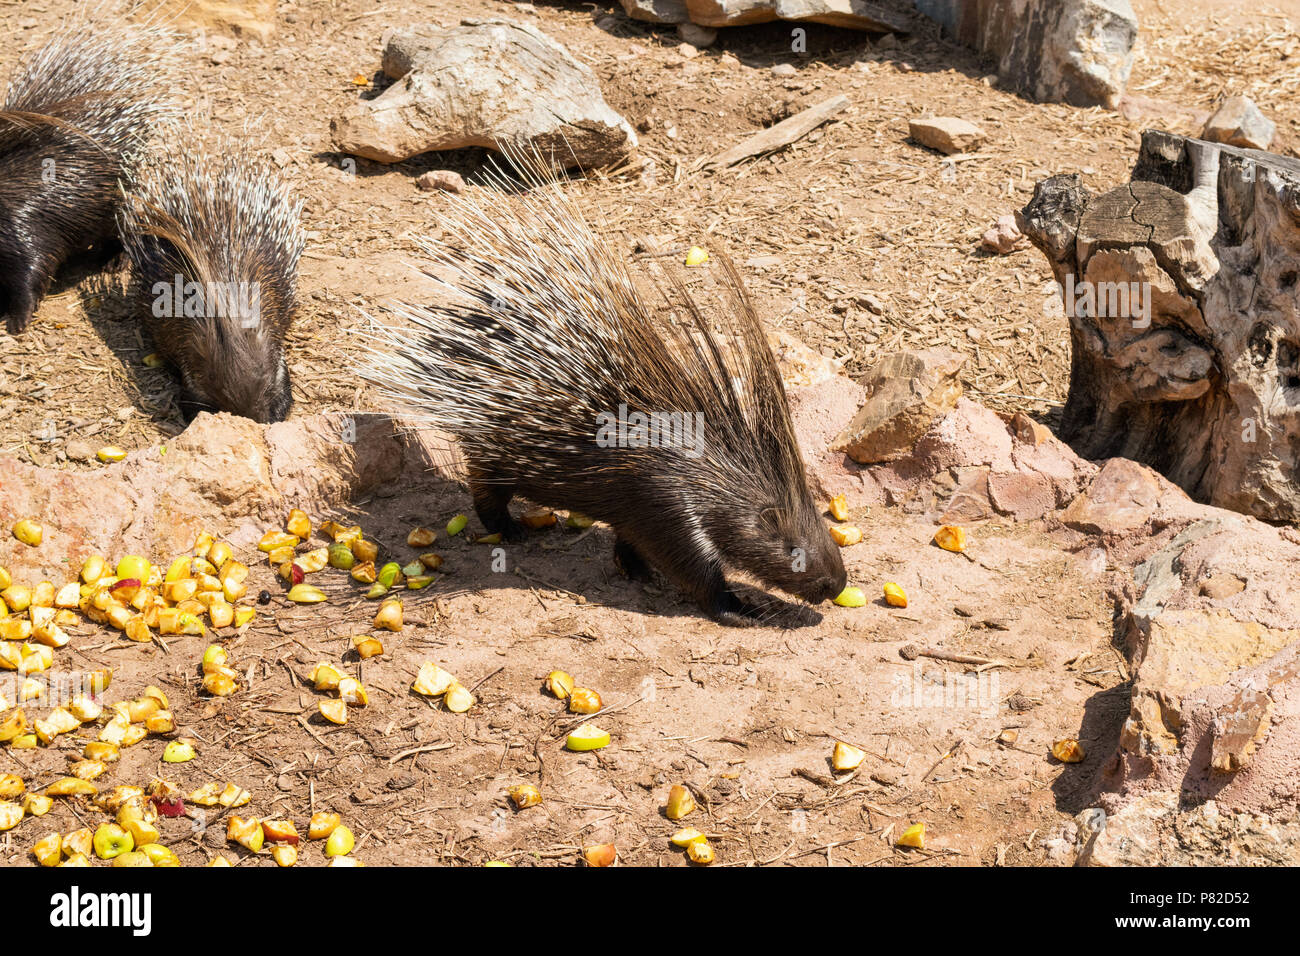 Indian Crested Porcupine (Hystrix indica), eating in outdoor enclosure Stock Photo